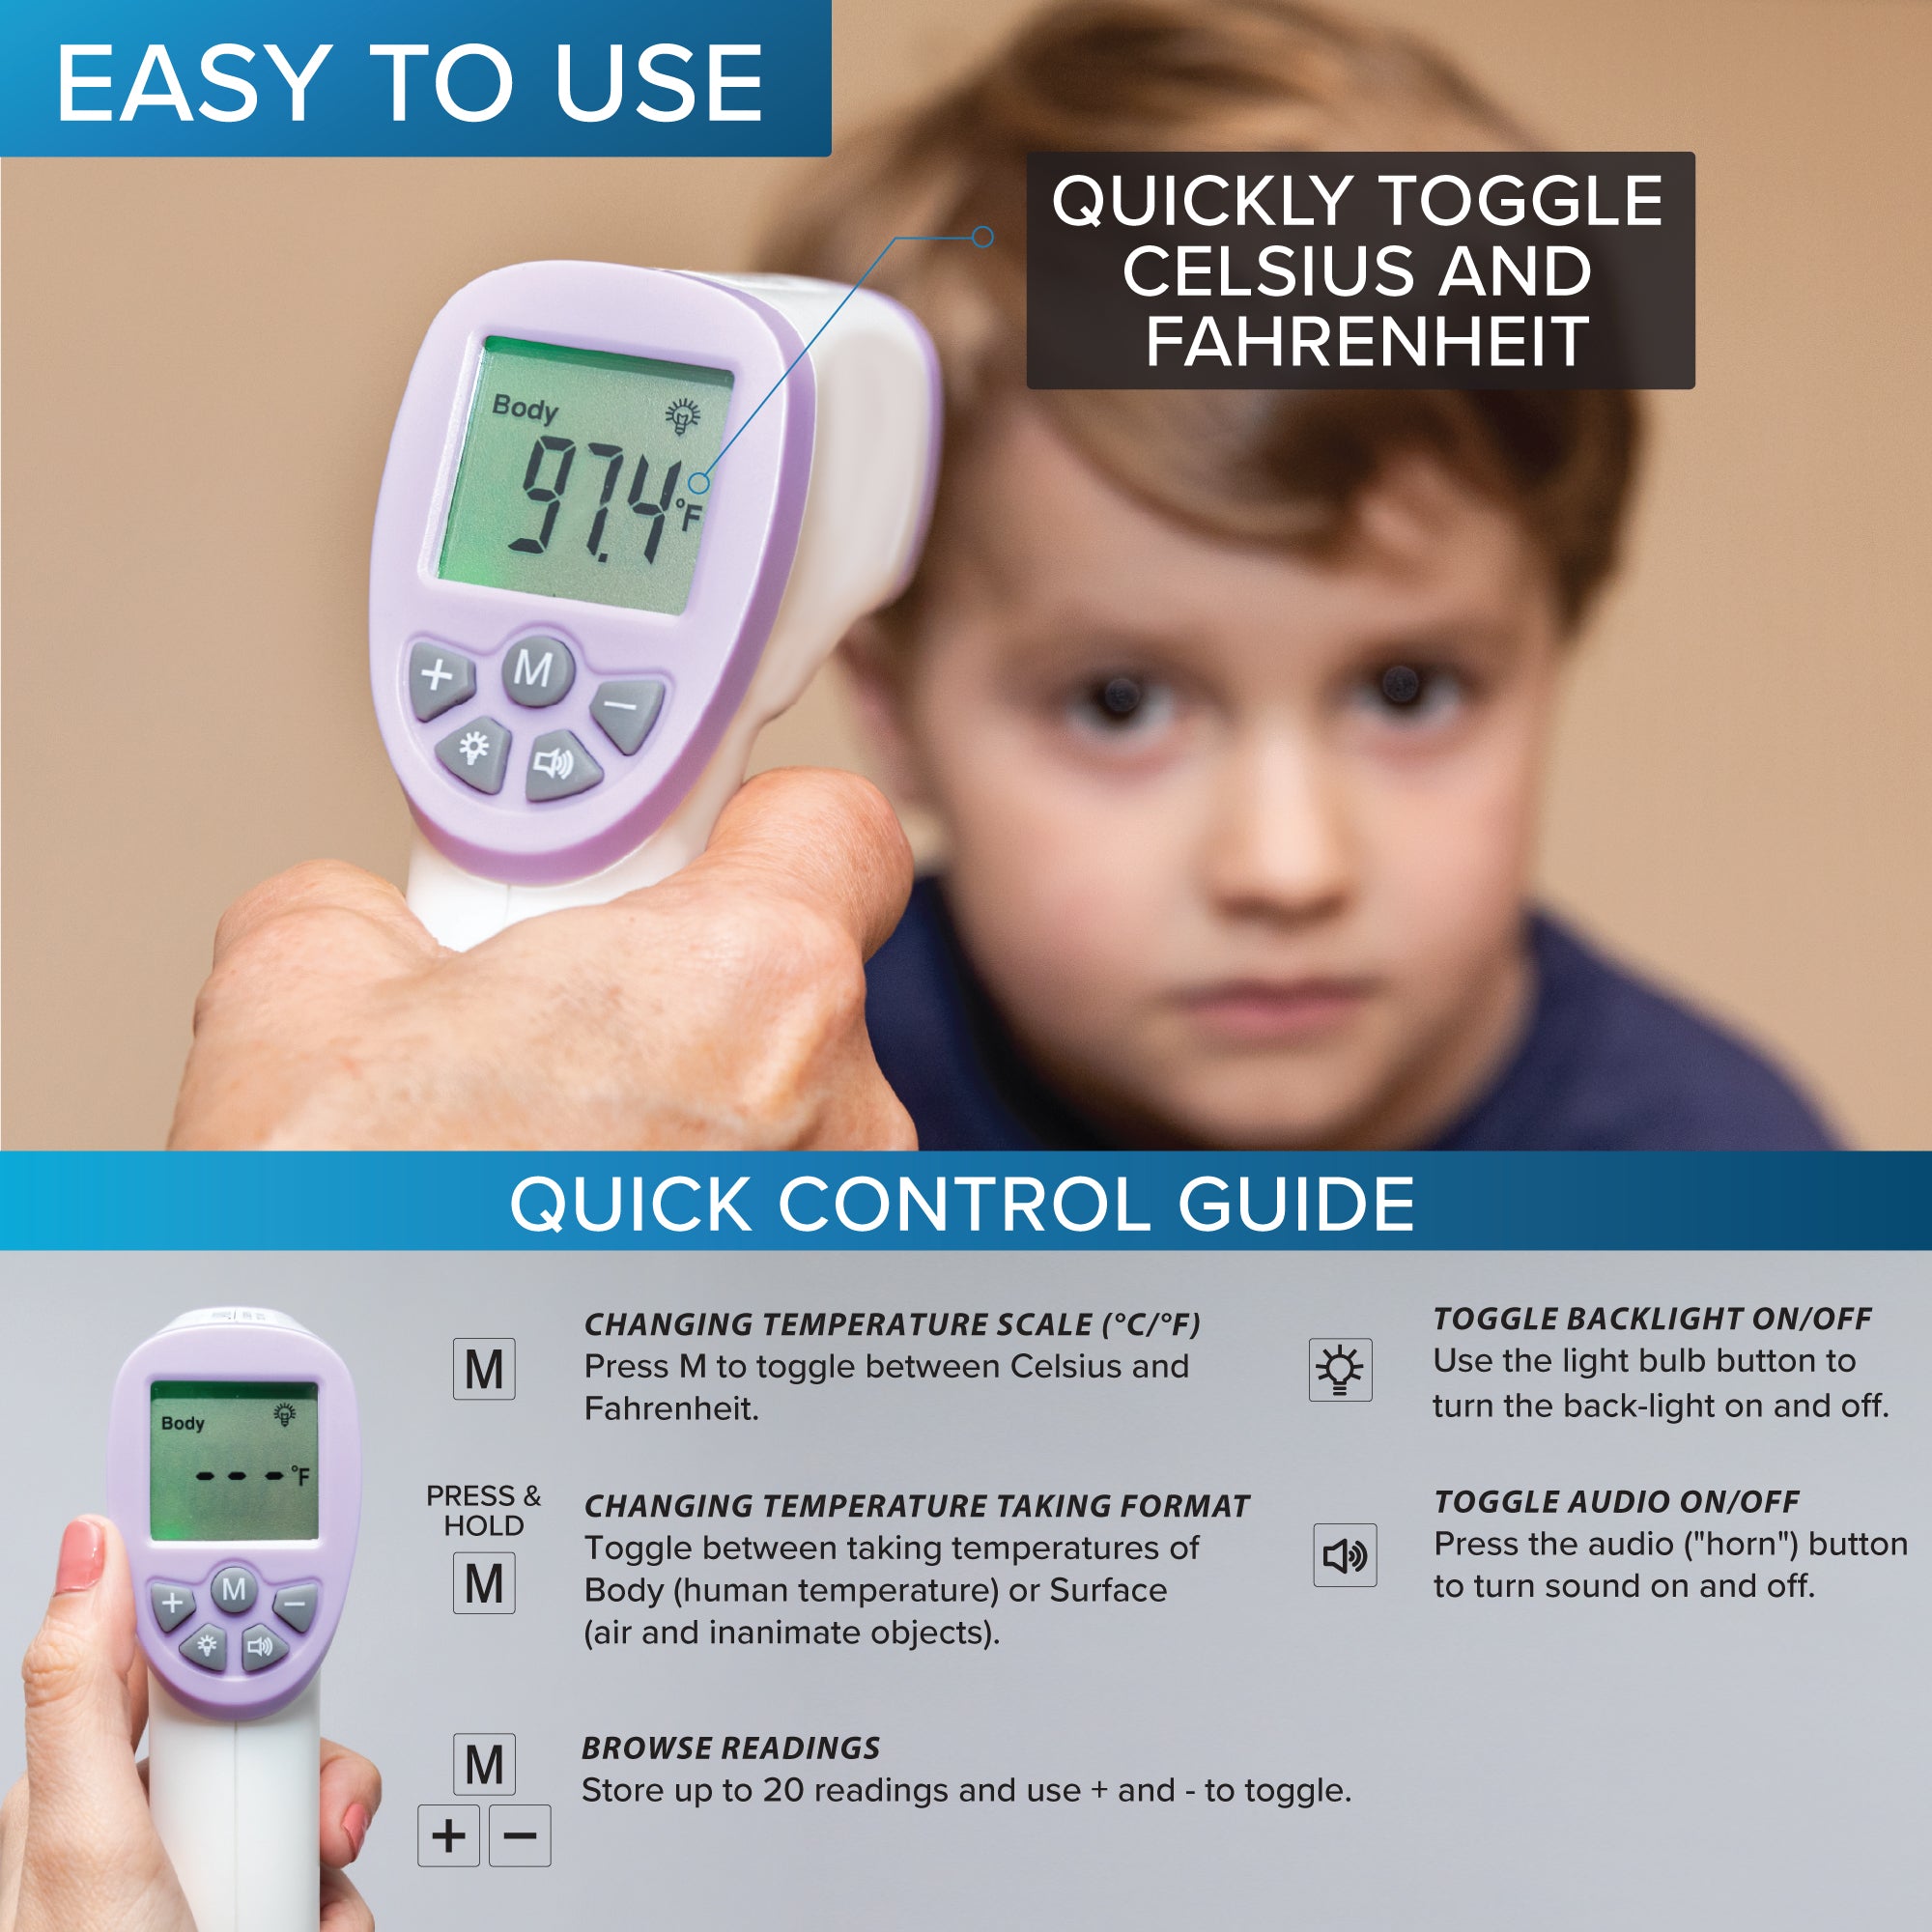 Touchless Forehead Thermometer for Fever, No Contact Infrared Digital Thermometer for Adults and Kids, Contactless Smart Temperature Gun, Size: One